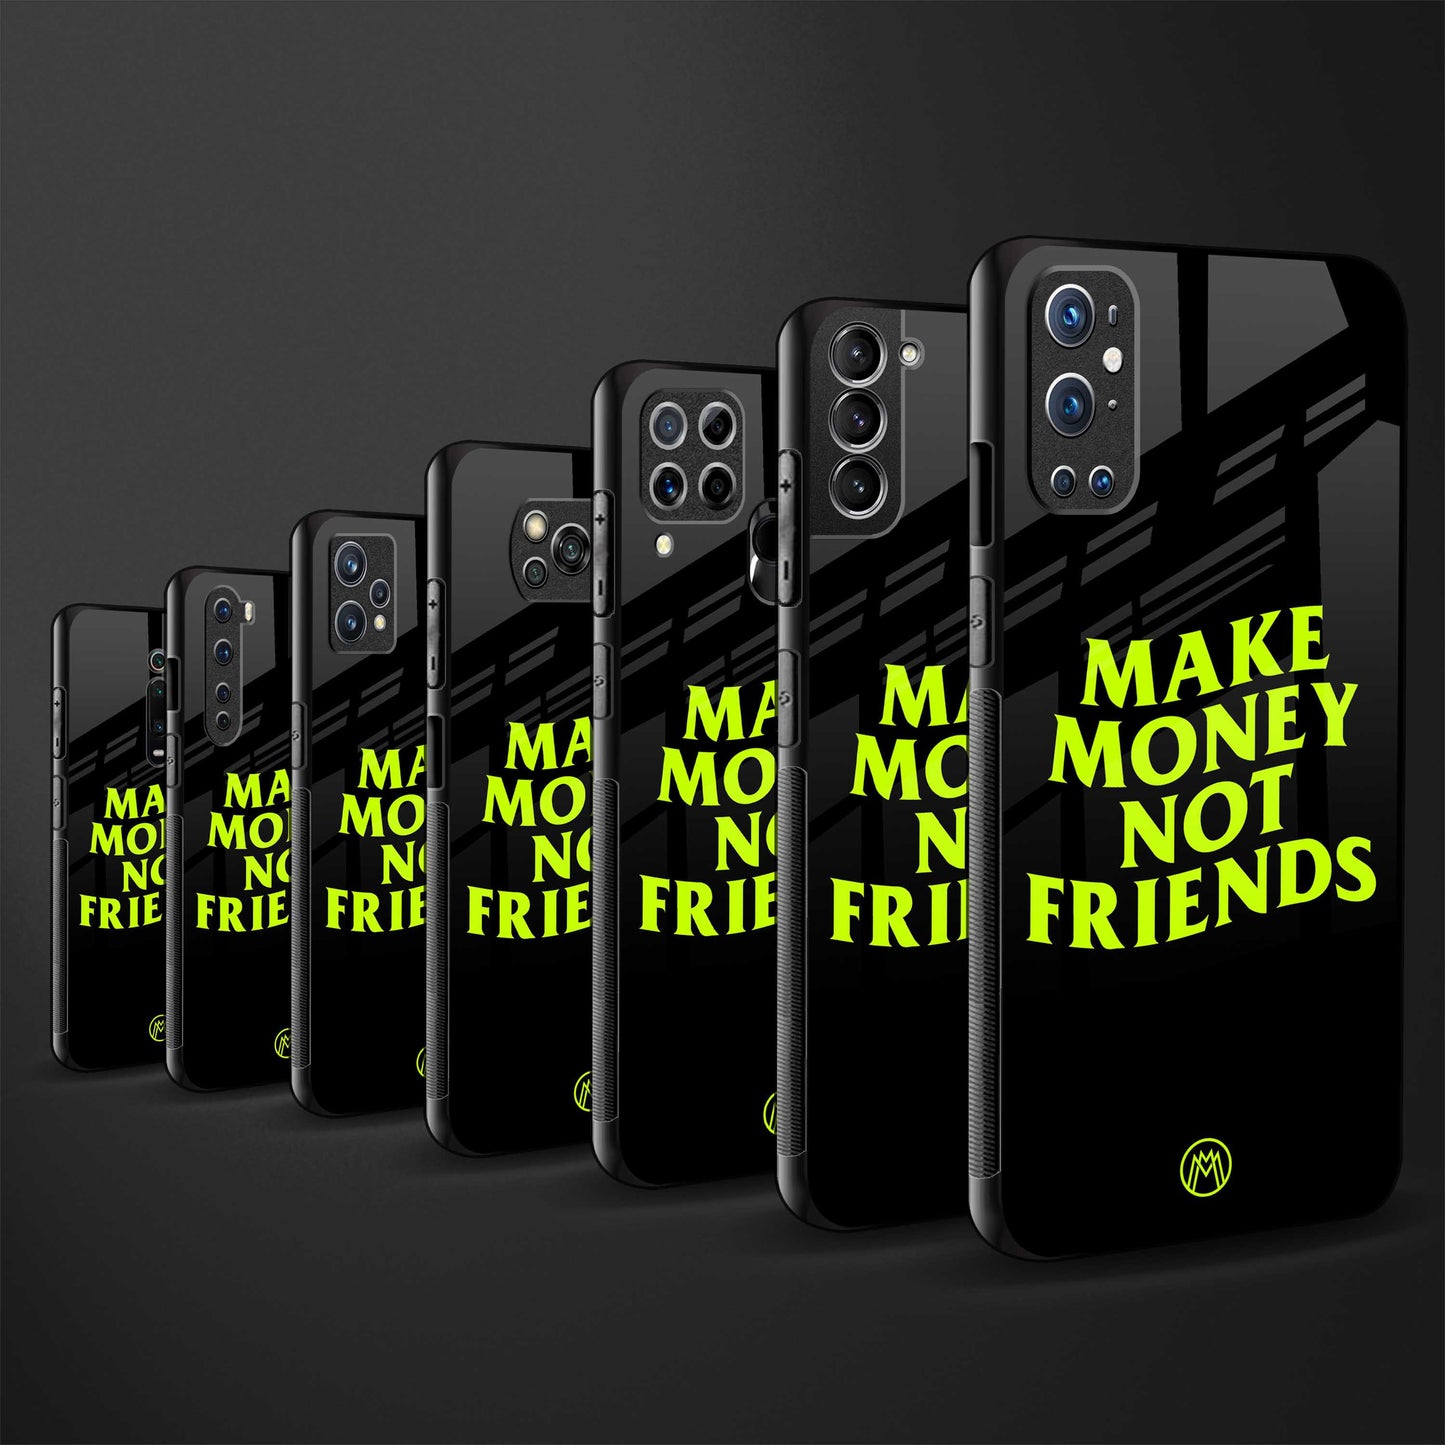 make money not friends back phone cover | glass case for samsung galaxy a73 5g